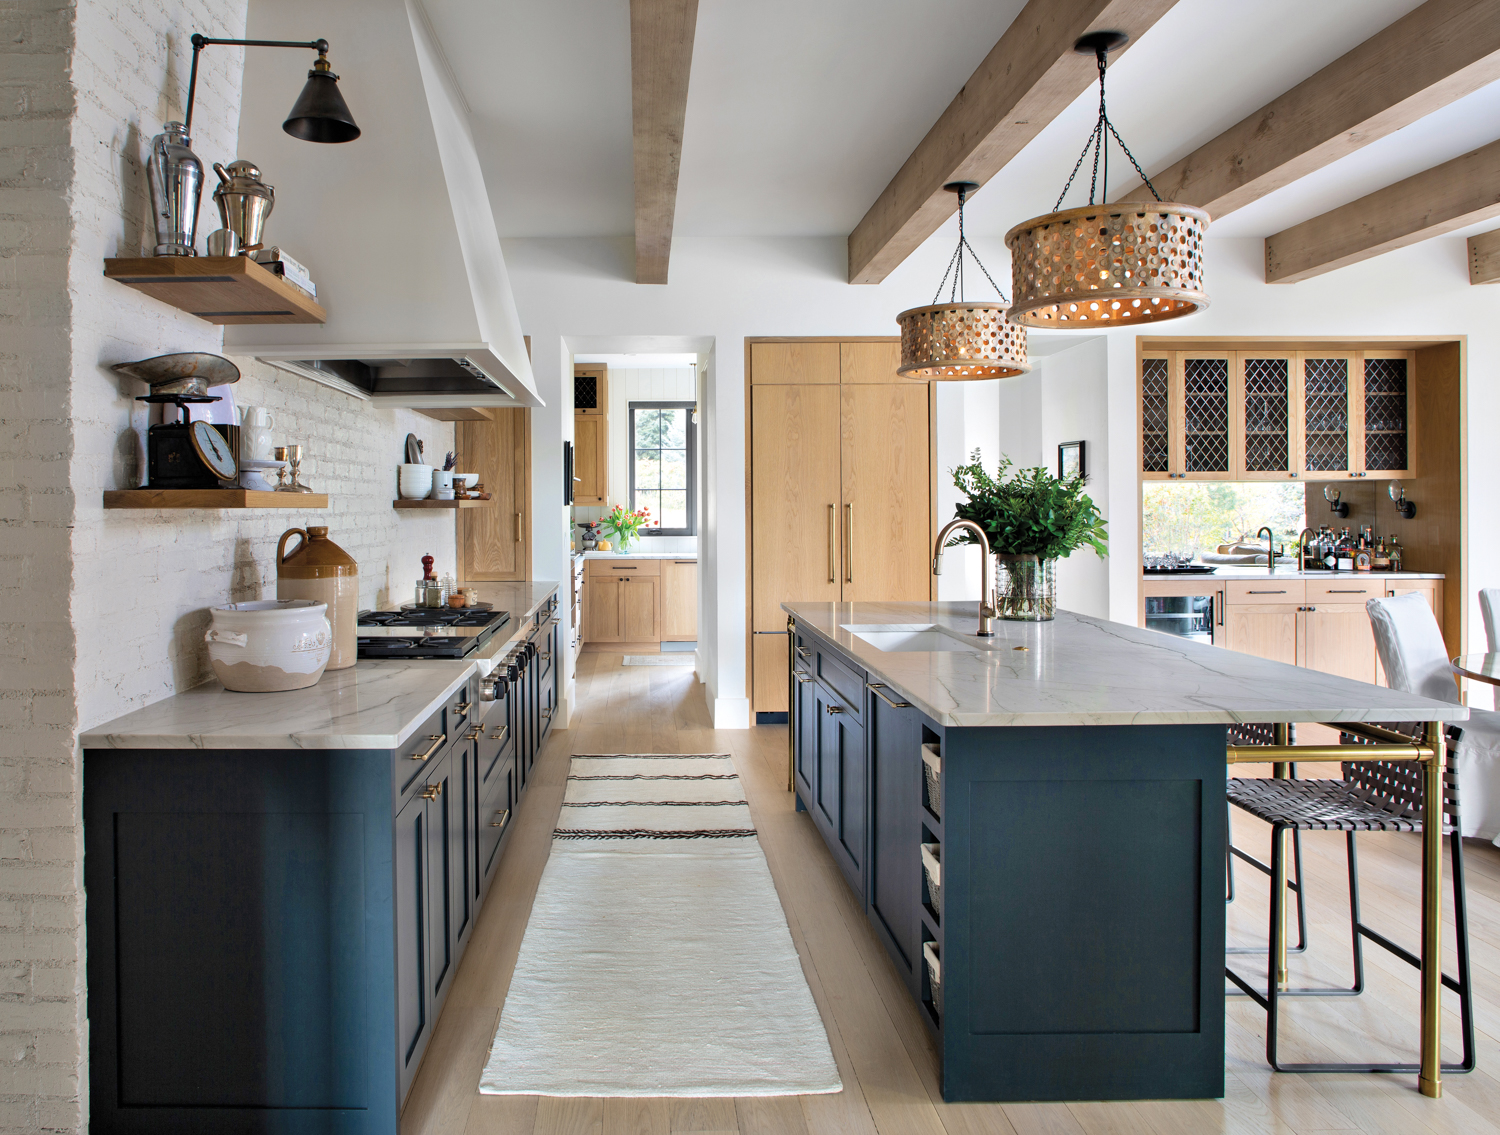 kitchen with rustic wood beams and a white-painted brick wall, with blue-black custom cabinets